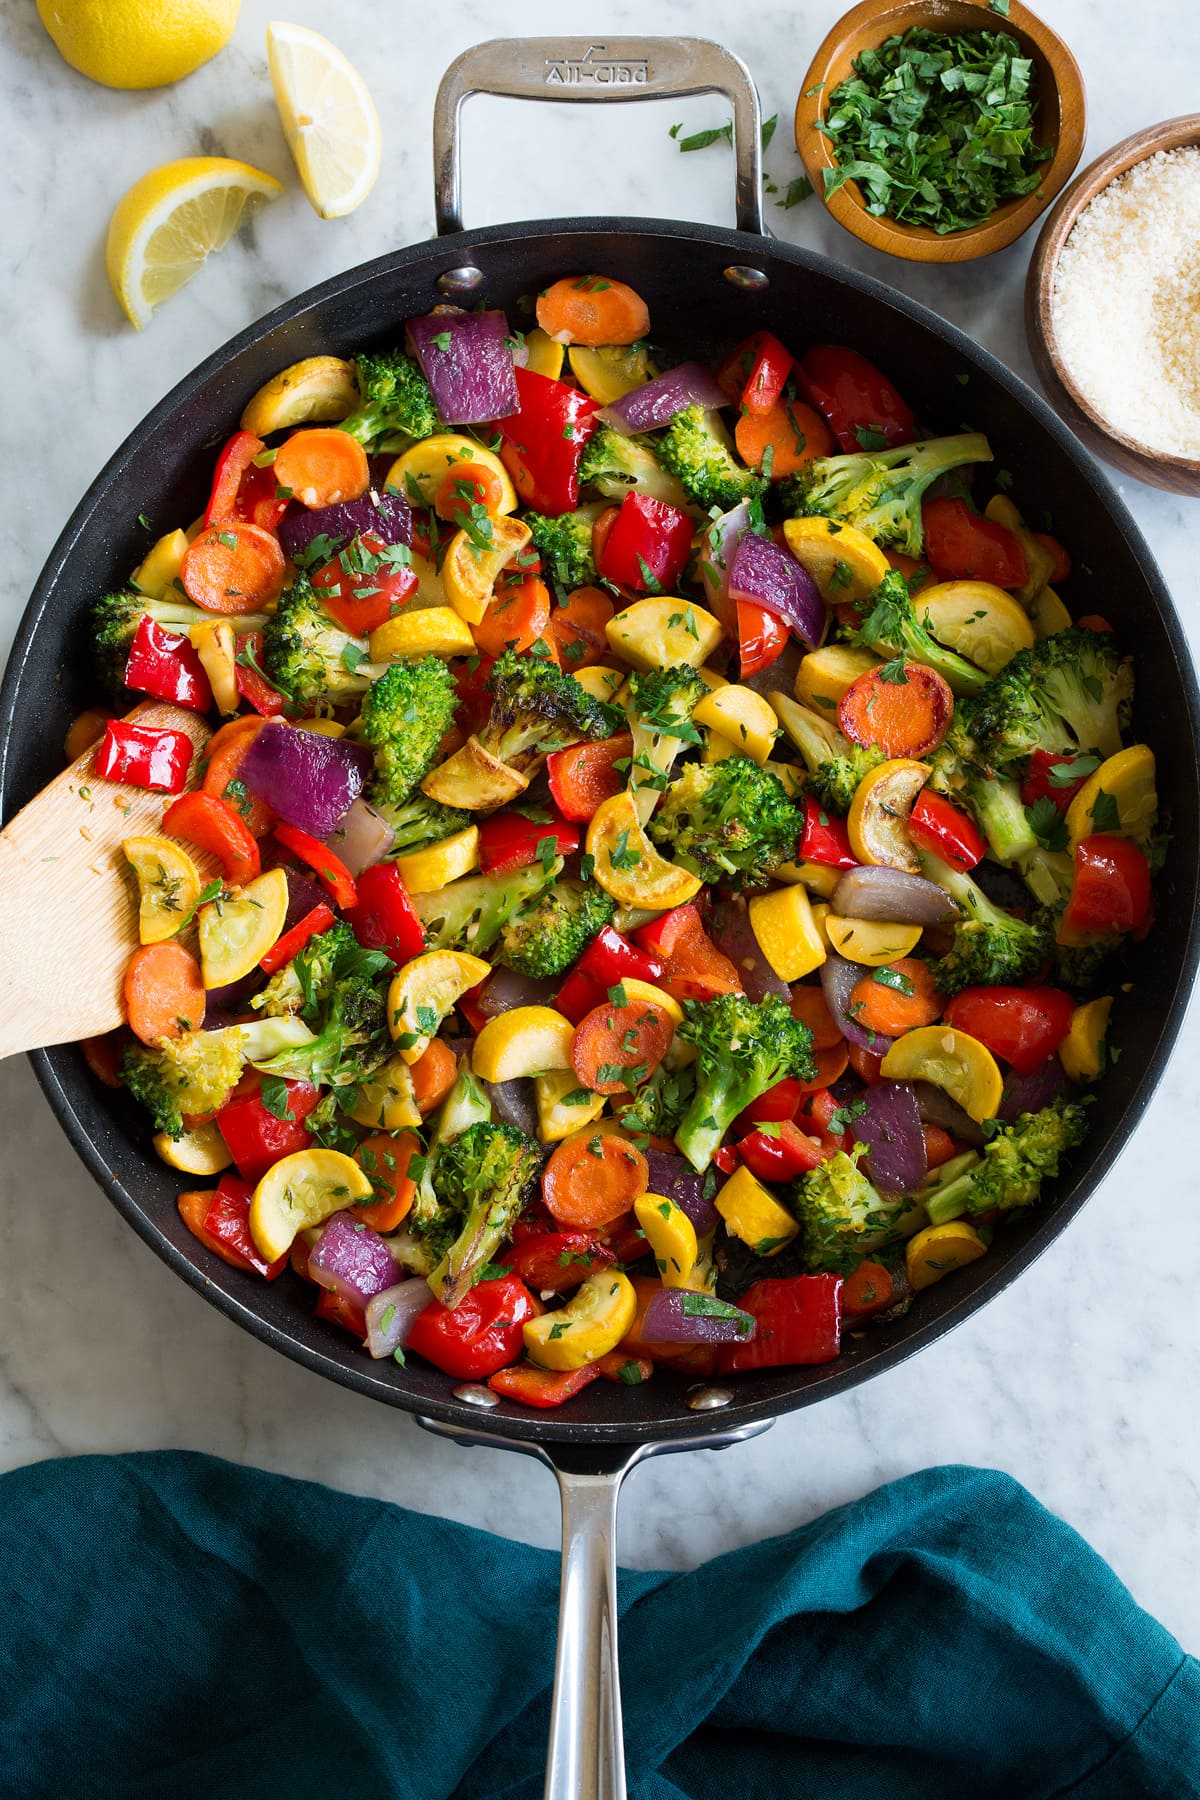 Photo: Sautéed Vegetables shown from above in a black skillet sitting on a marble tabletop.